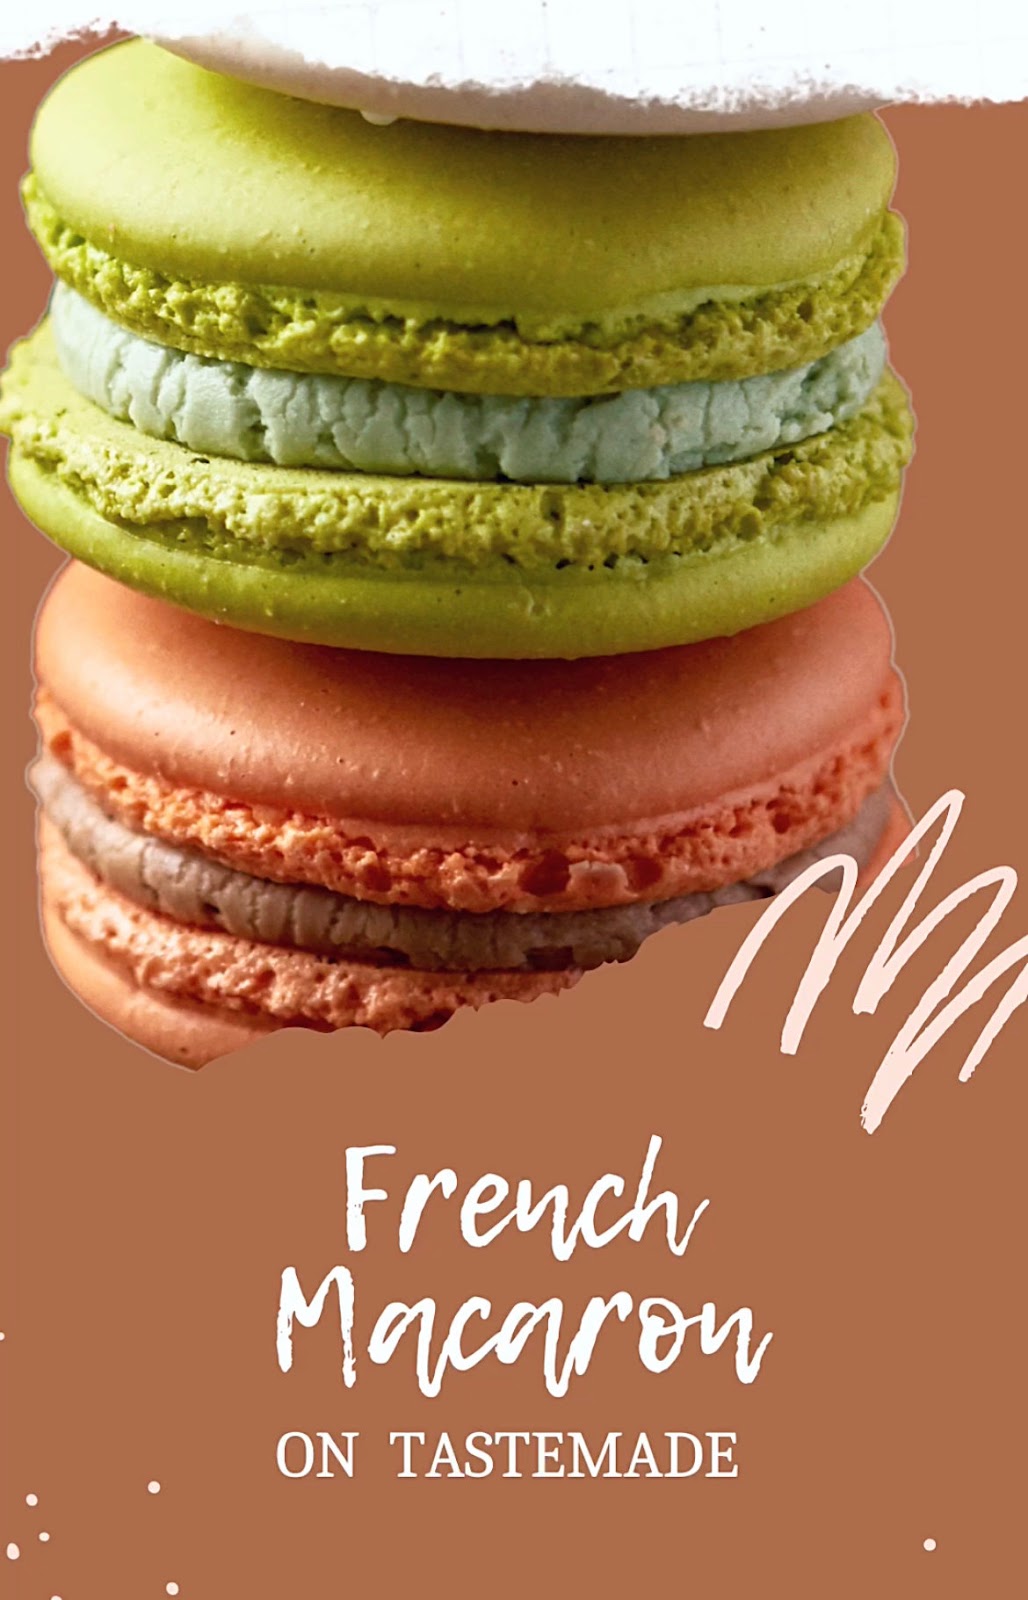 French Macaron Experience